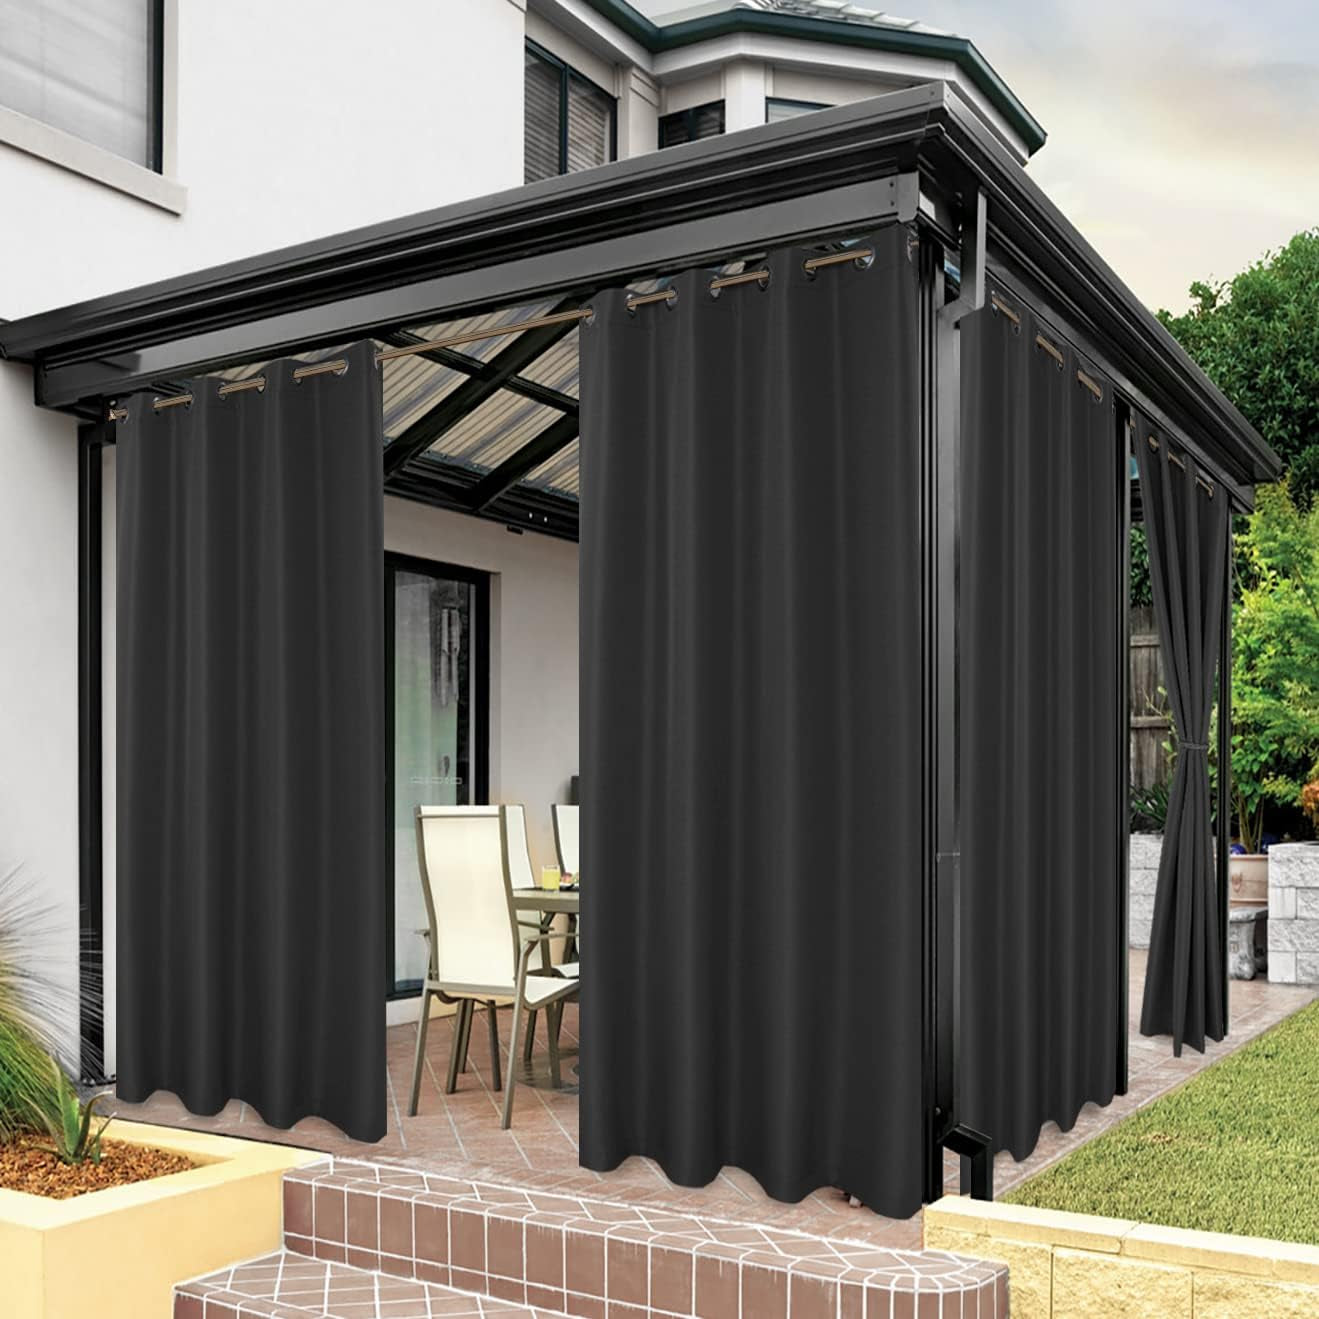 BONZER Outdoor Curtains for Patio Waterproof, Premium Thick Privacy Weatherproof Grommet outside Curtains for Porch, Gazebo, Deck, 1 Panel, 54W X 84L Inch, White  BONZER Charcoal 84W X 84L Inch 